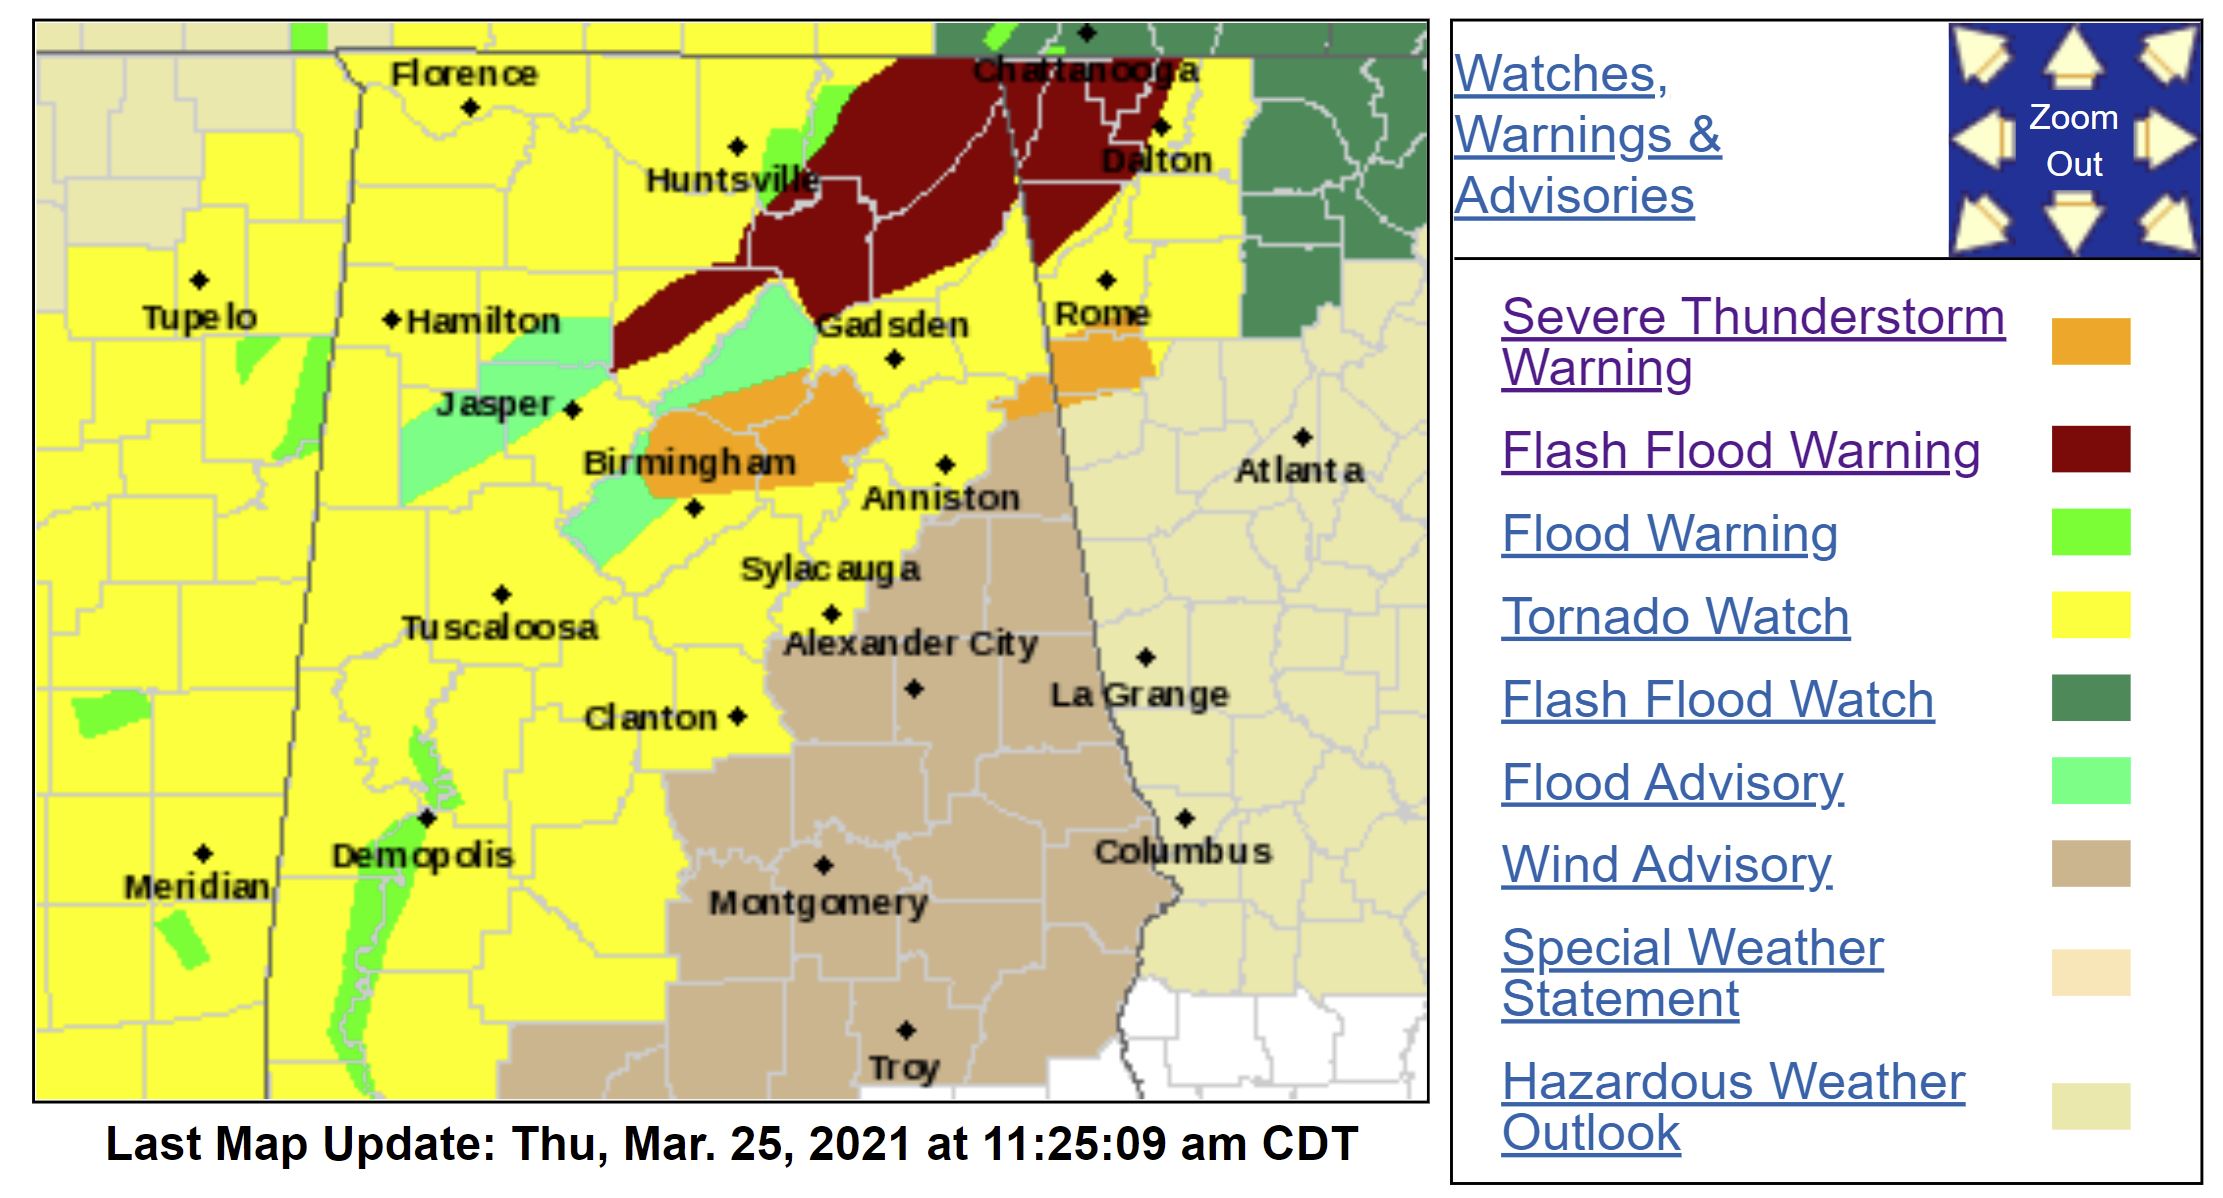 Tornado Watch issued for 23 Alabama counties